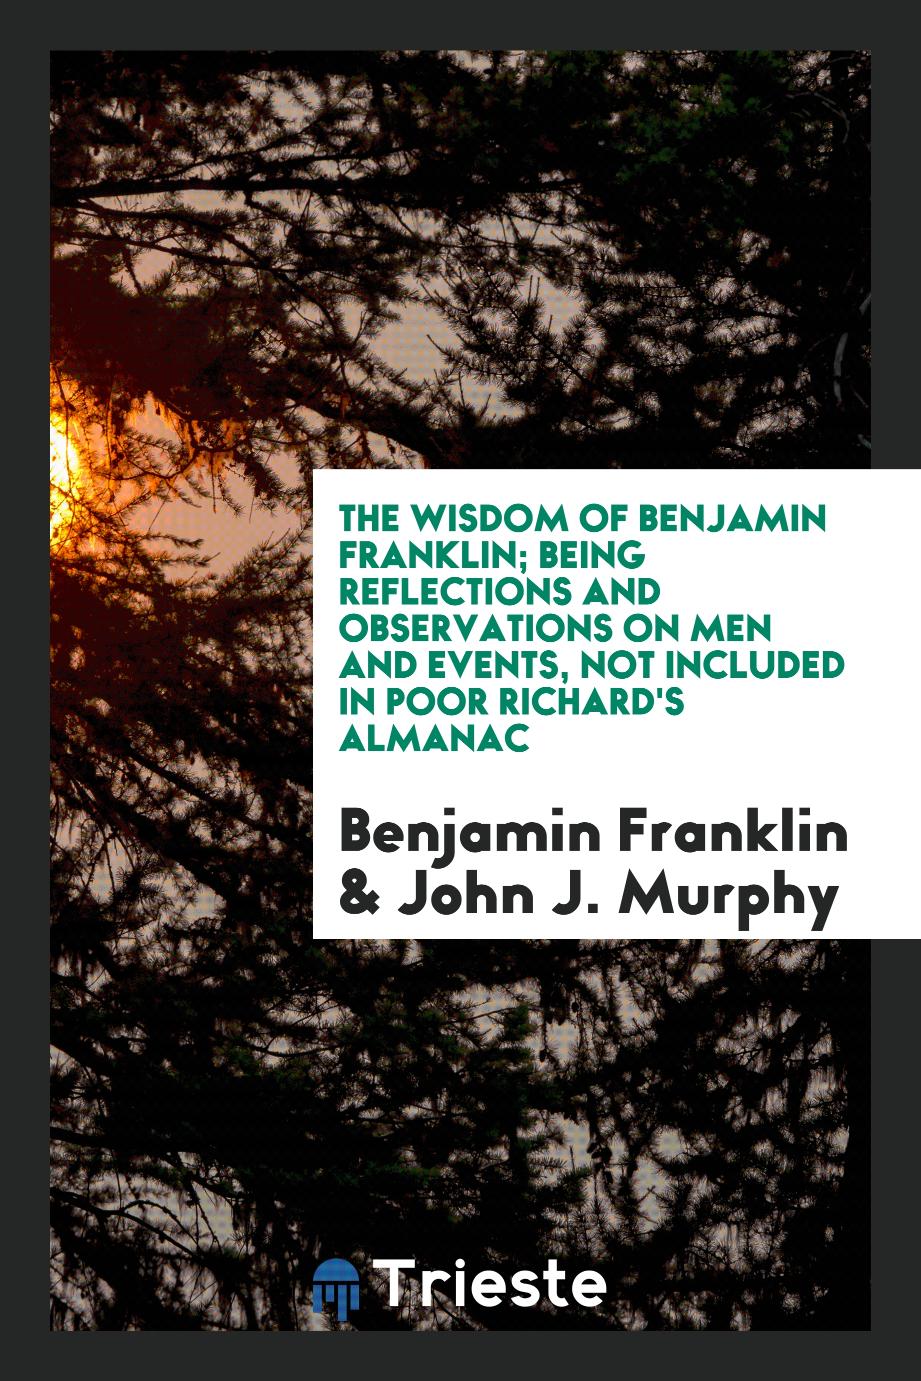 The wisdom of Benjamin Franklin; being reflections and observations on men and events, not included in Poor Richard's almanac